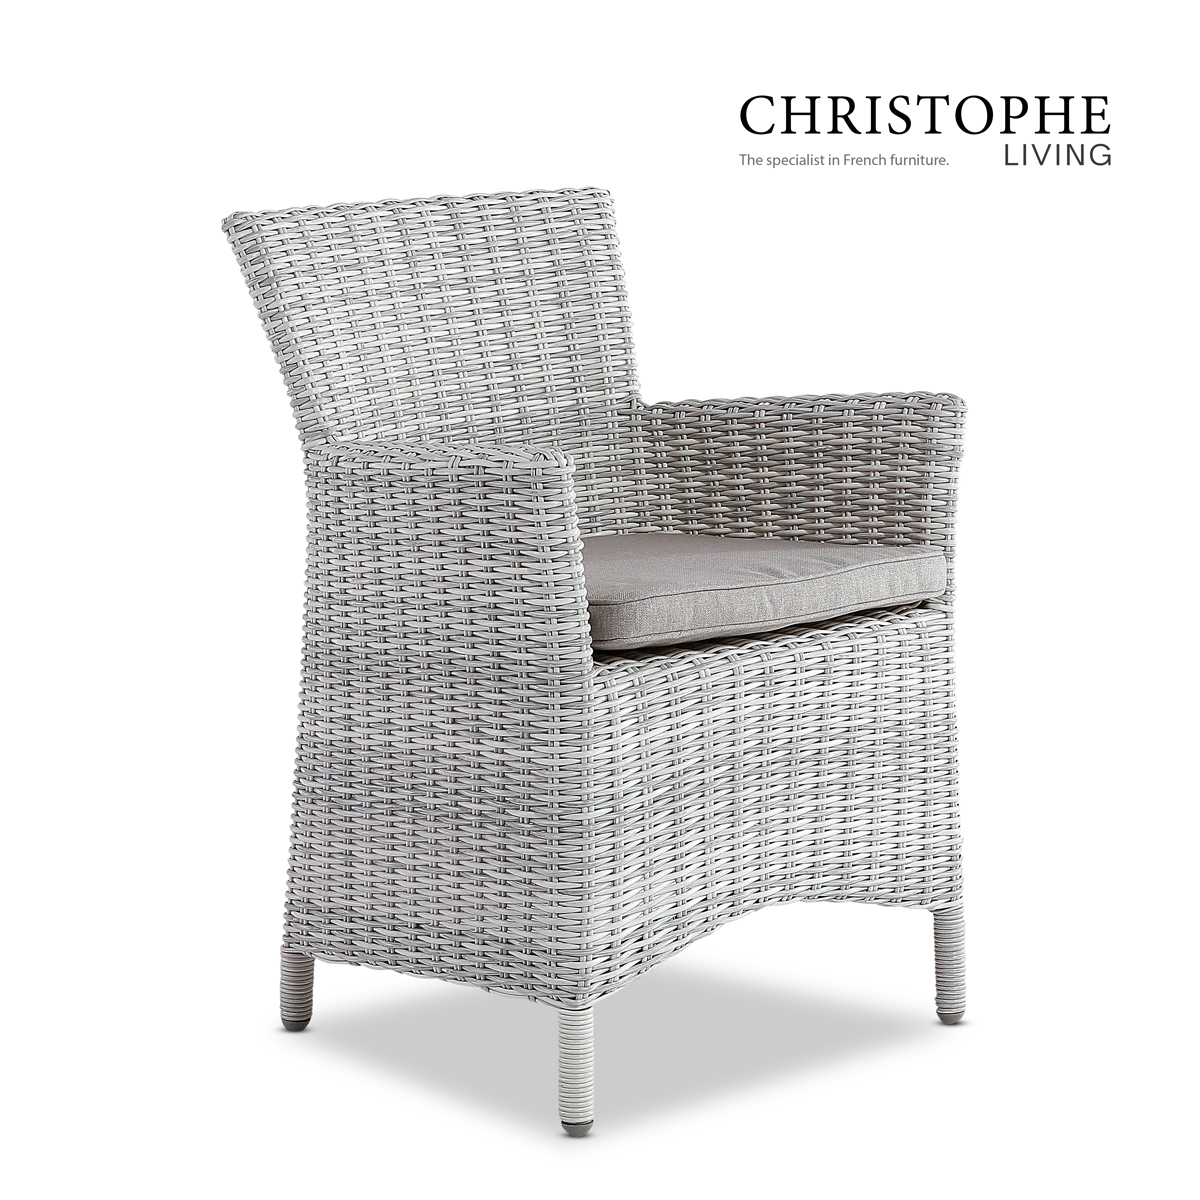 Four Mile Classic Outdoor Dining Chair in White Grey Synthetic Rattan and Water-Resistant Fabric